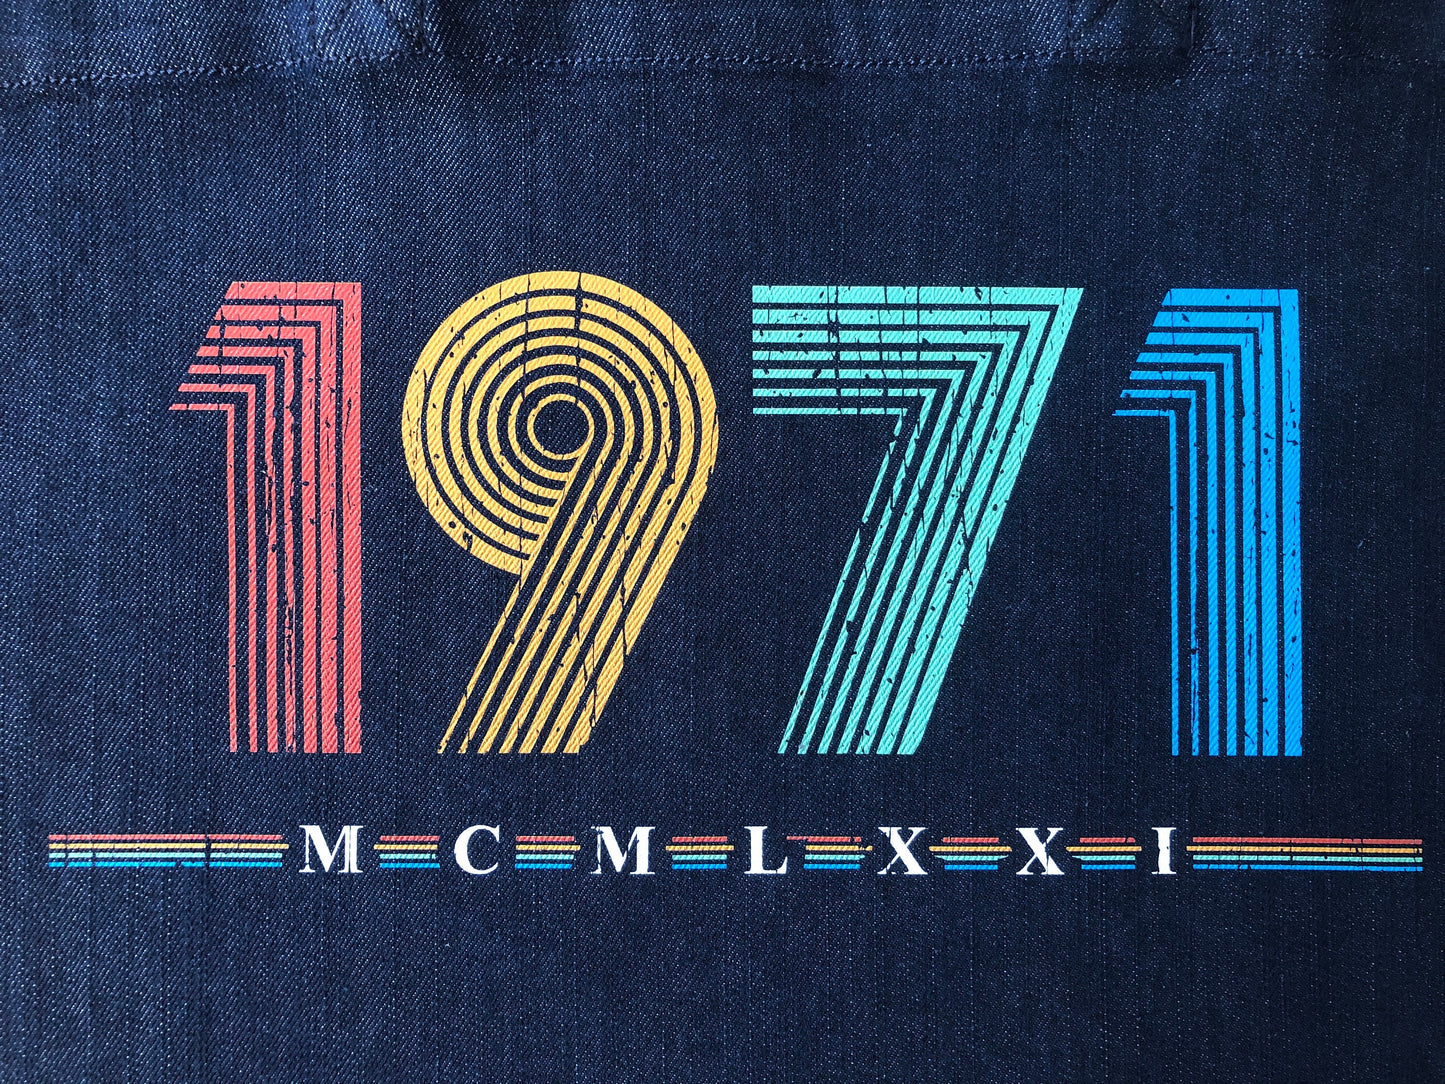 1971 Tote Bag, 51st Birthday Gift Reusable Shopping Carrier in Retro & Vintage 70s style, MCMLXXI Fiftieth Bday Bag For Men or Women